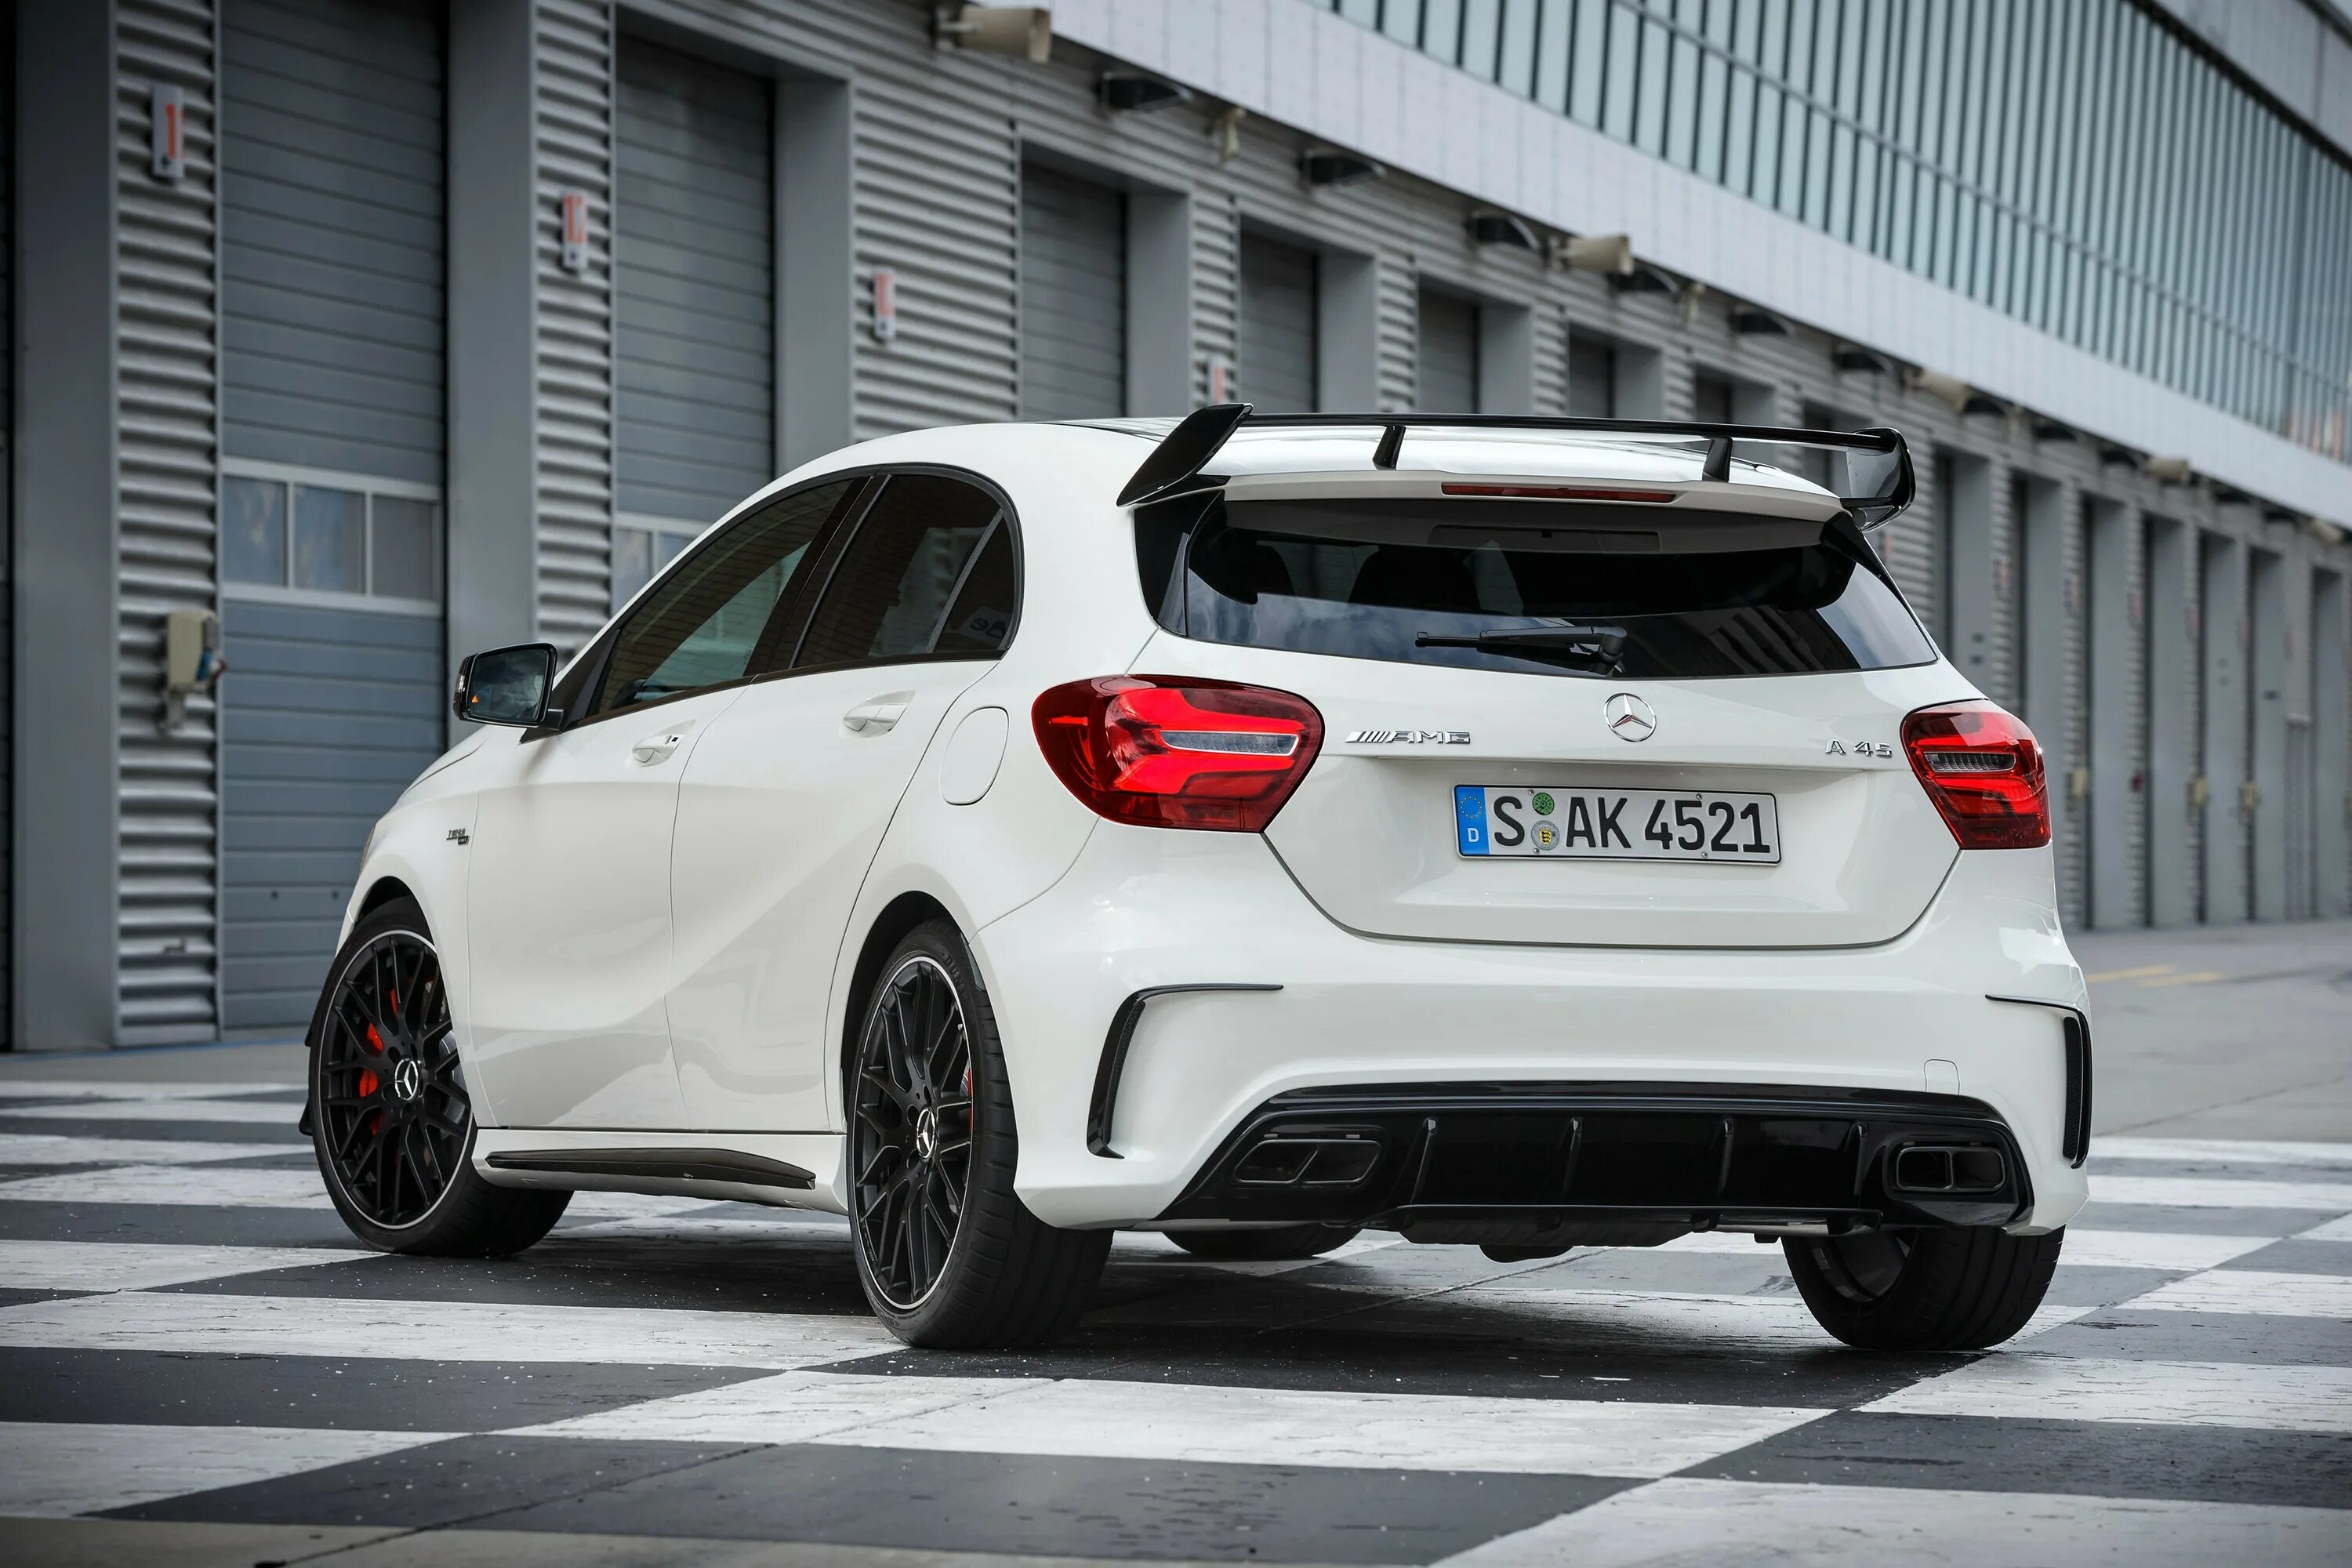 Mercedes Benz a45 AMG. Мерседес а45 АМГ. Mercedes АМГ 45. Mercedes-Benz a45 AMG w176.